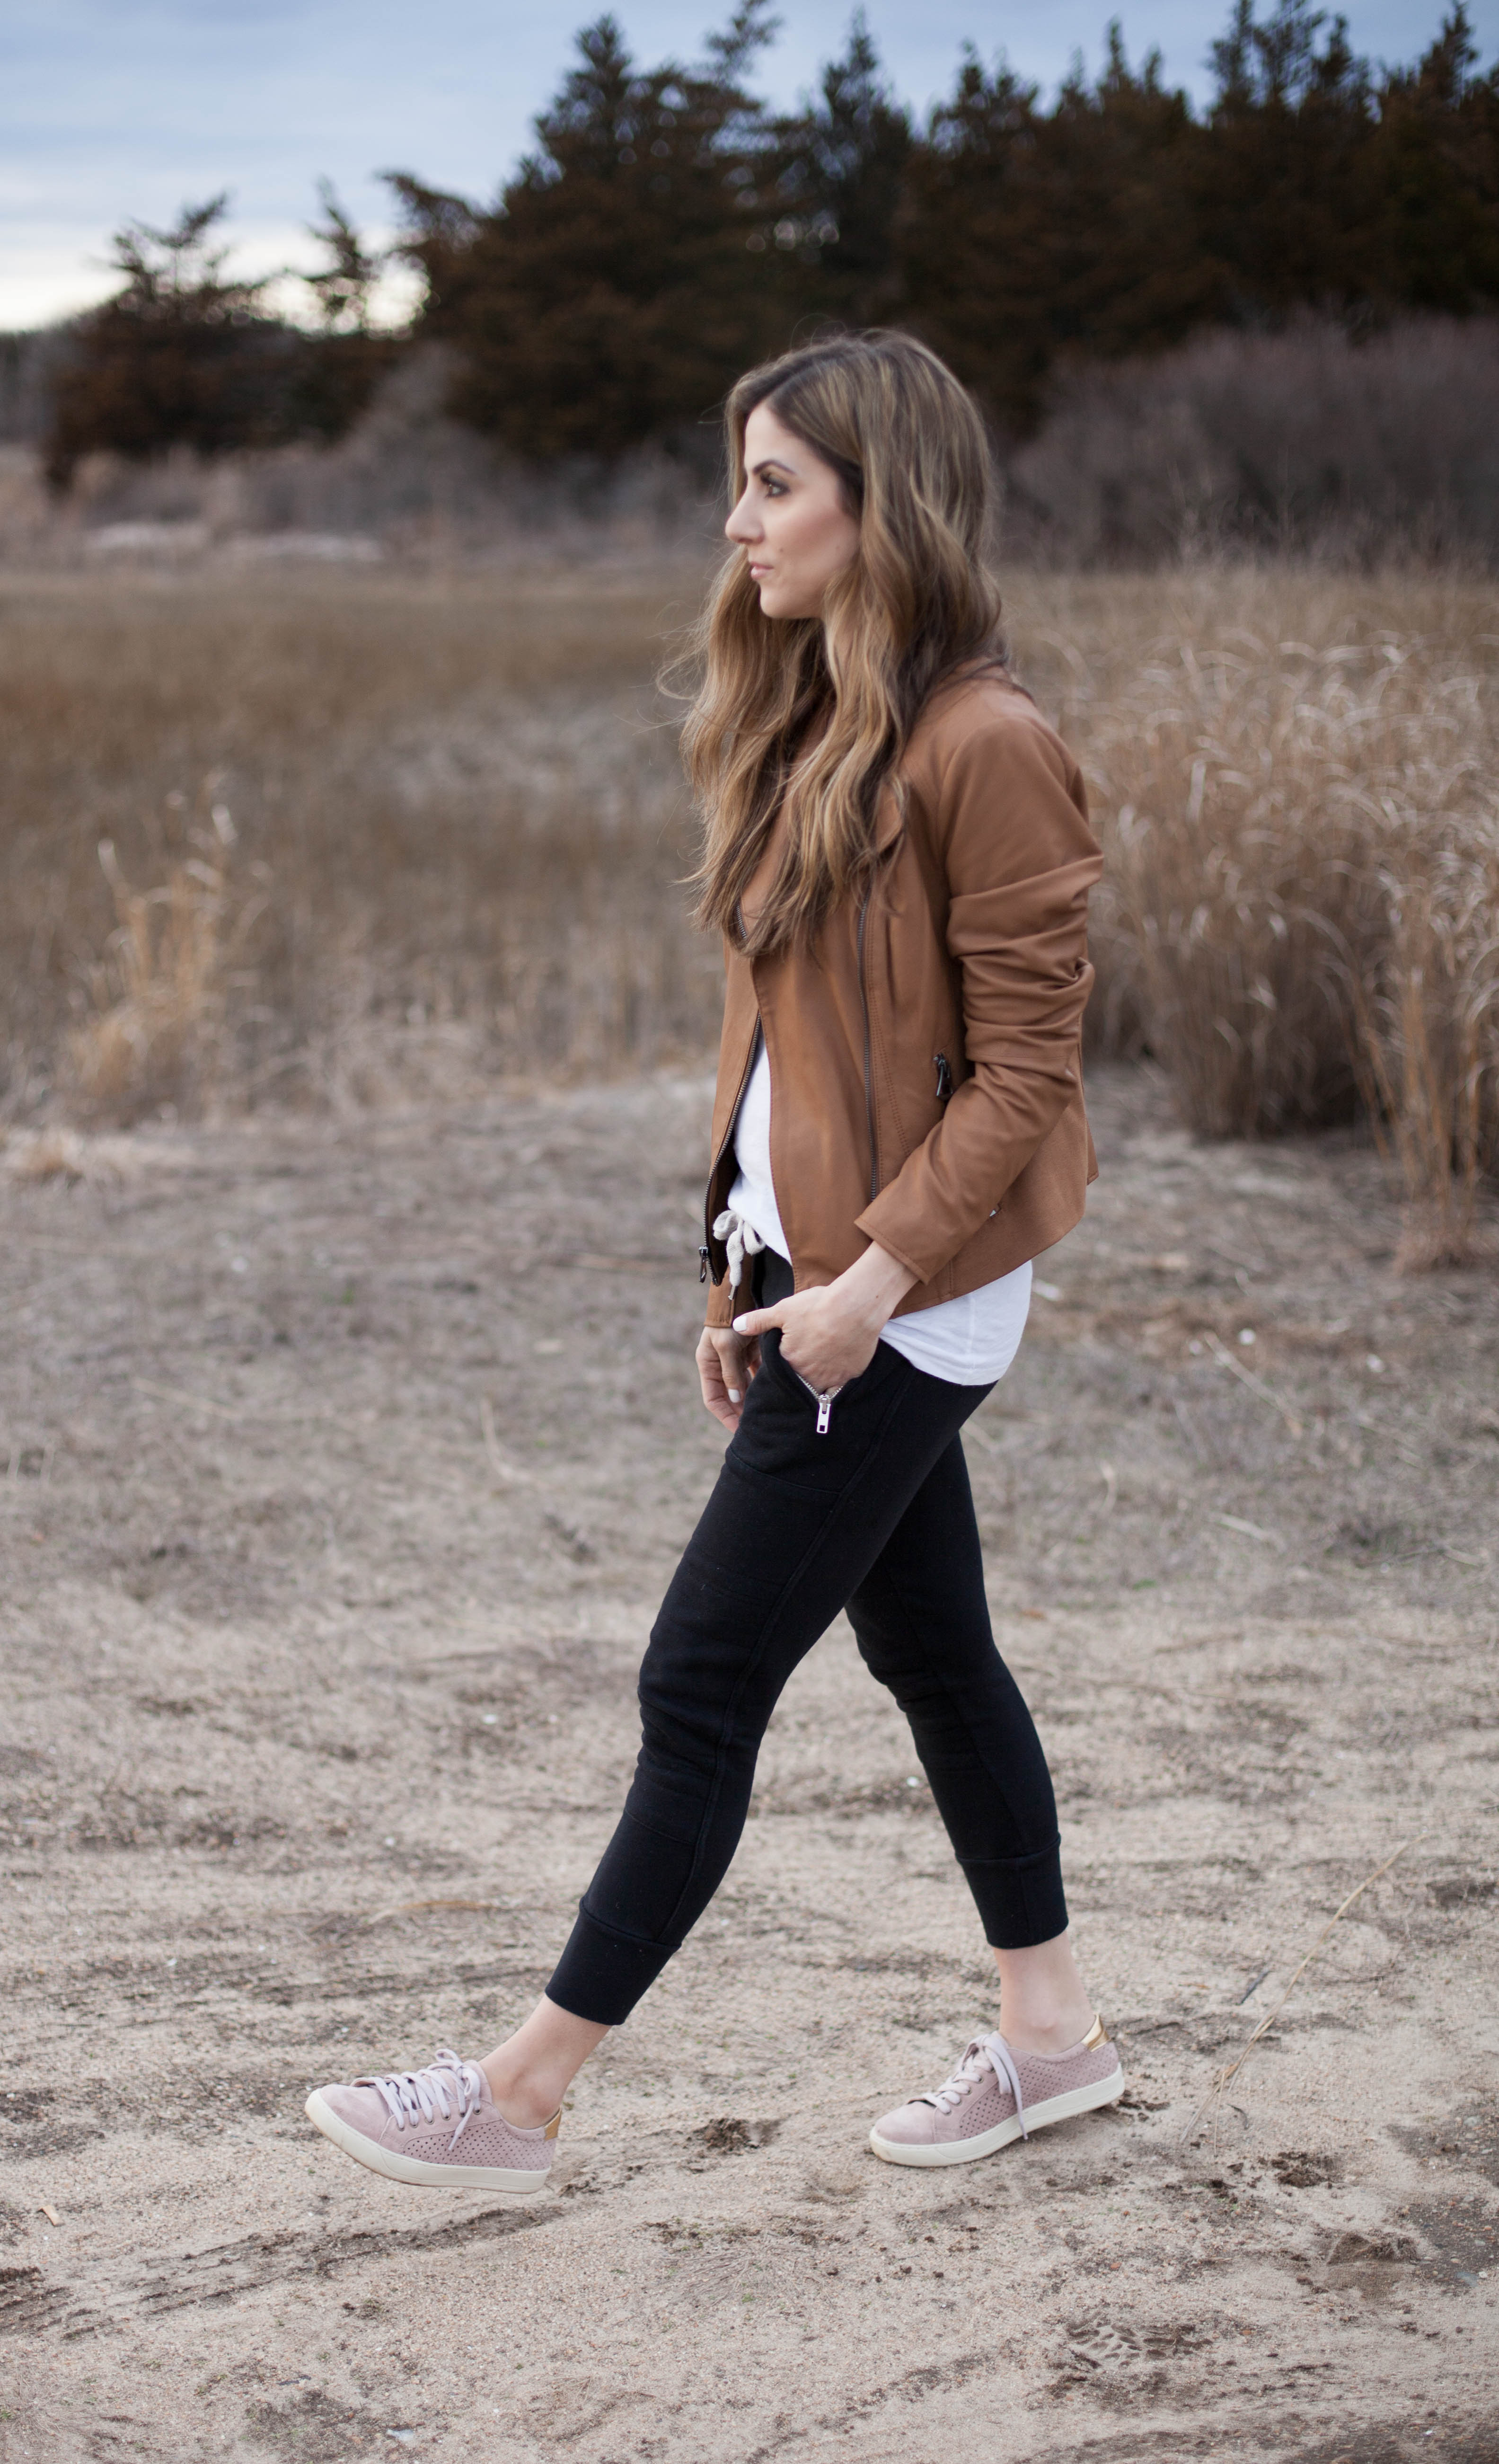 A simple way to style spring sneakers, featuring jogger pants and a classic leather jacket. This casual look is perfect for chilly spring days!